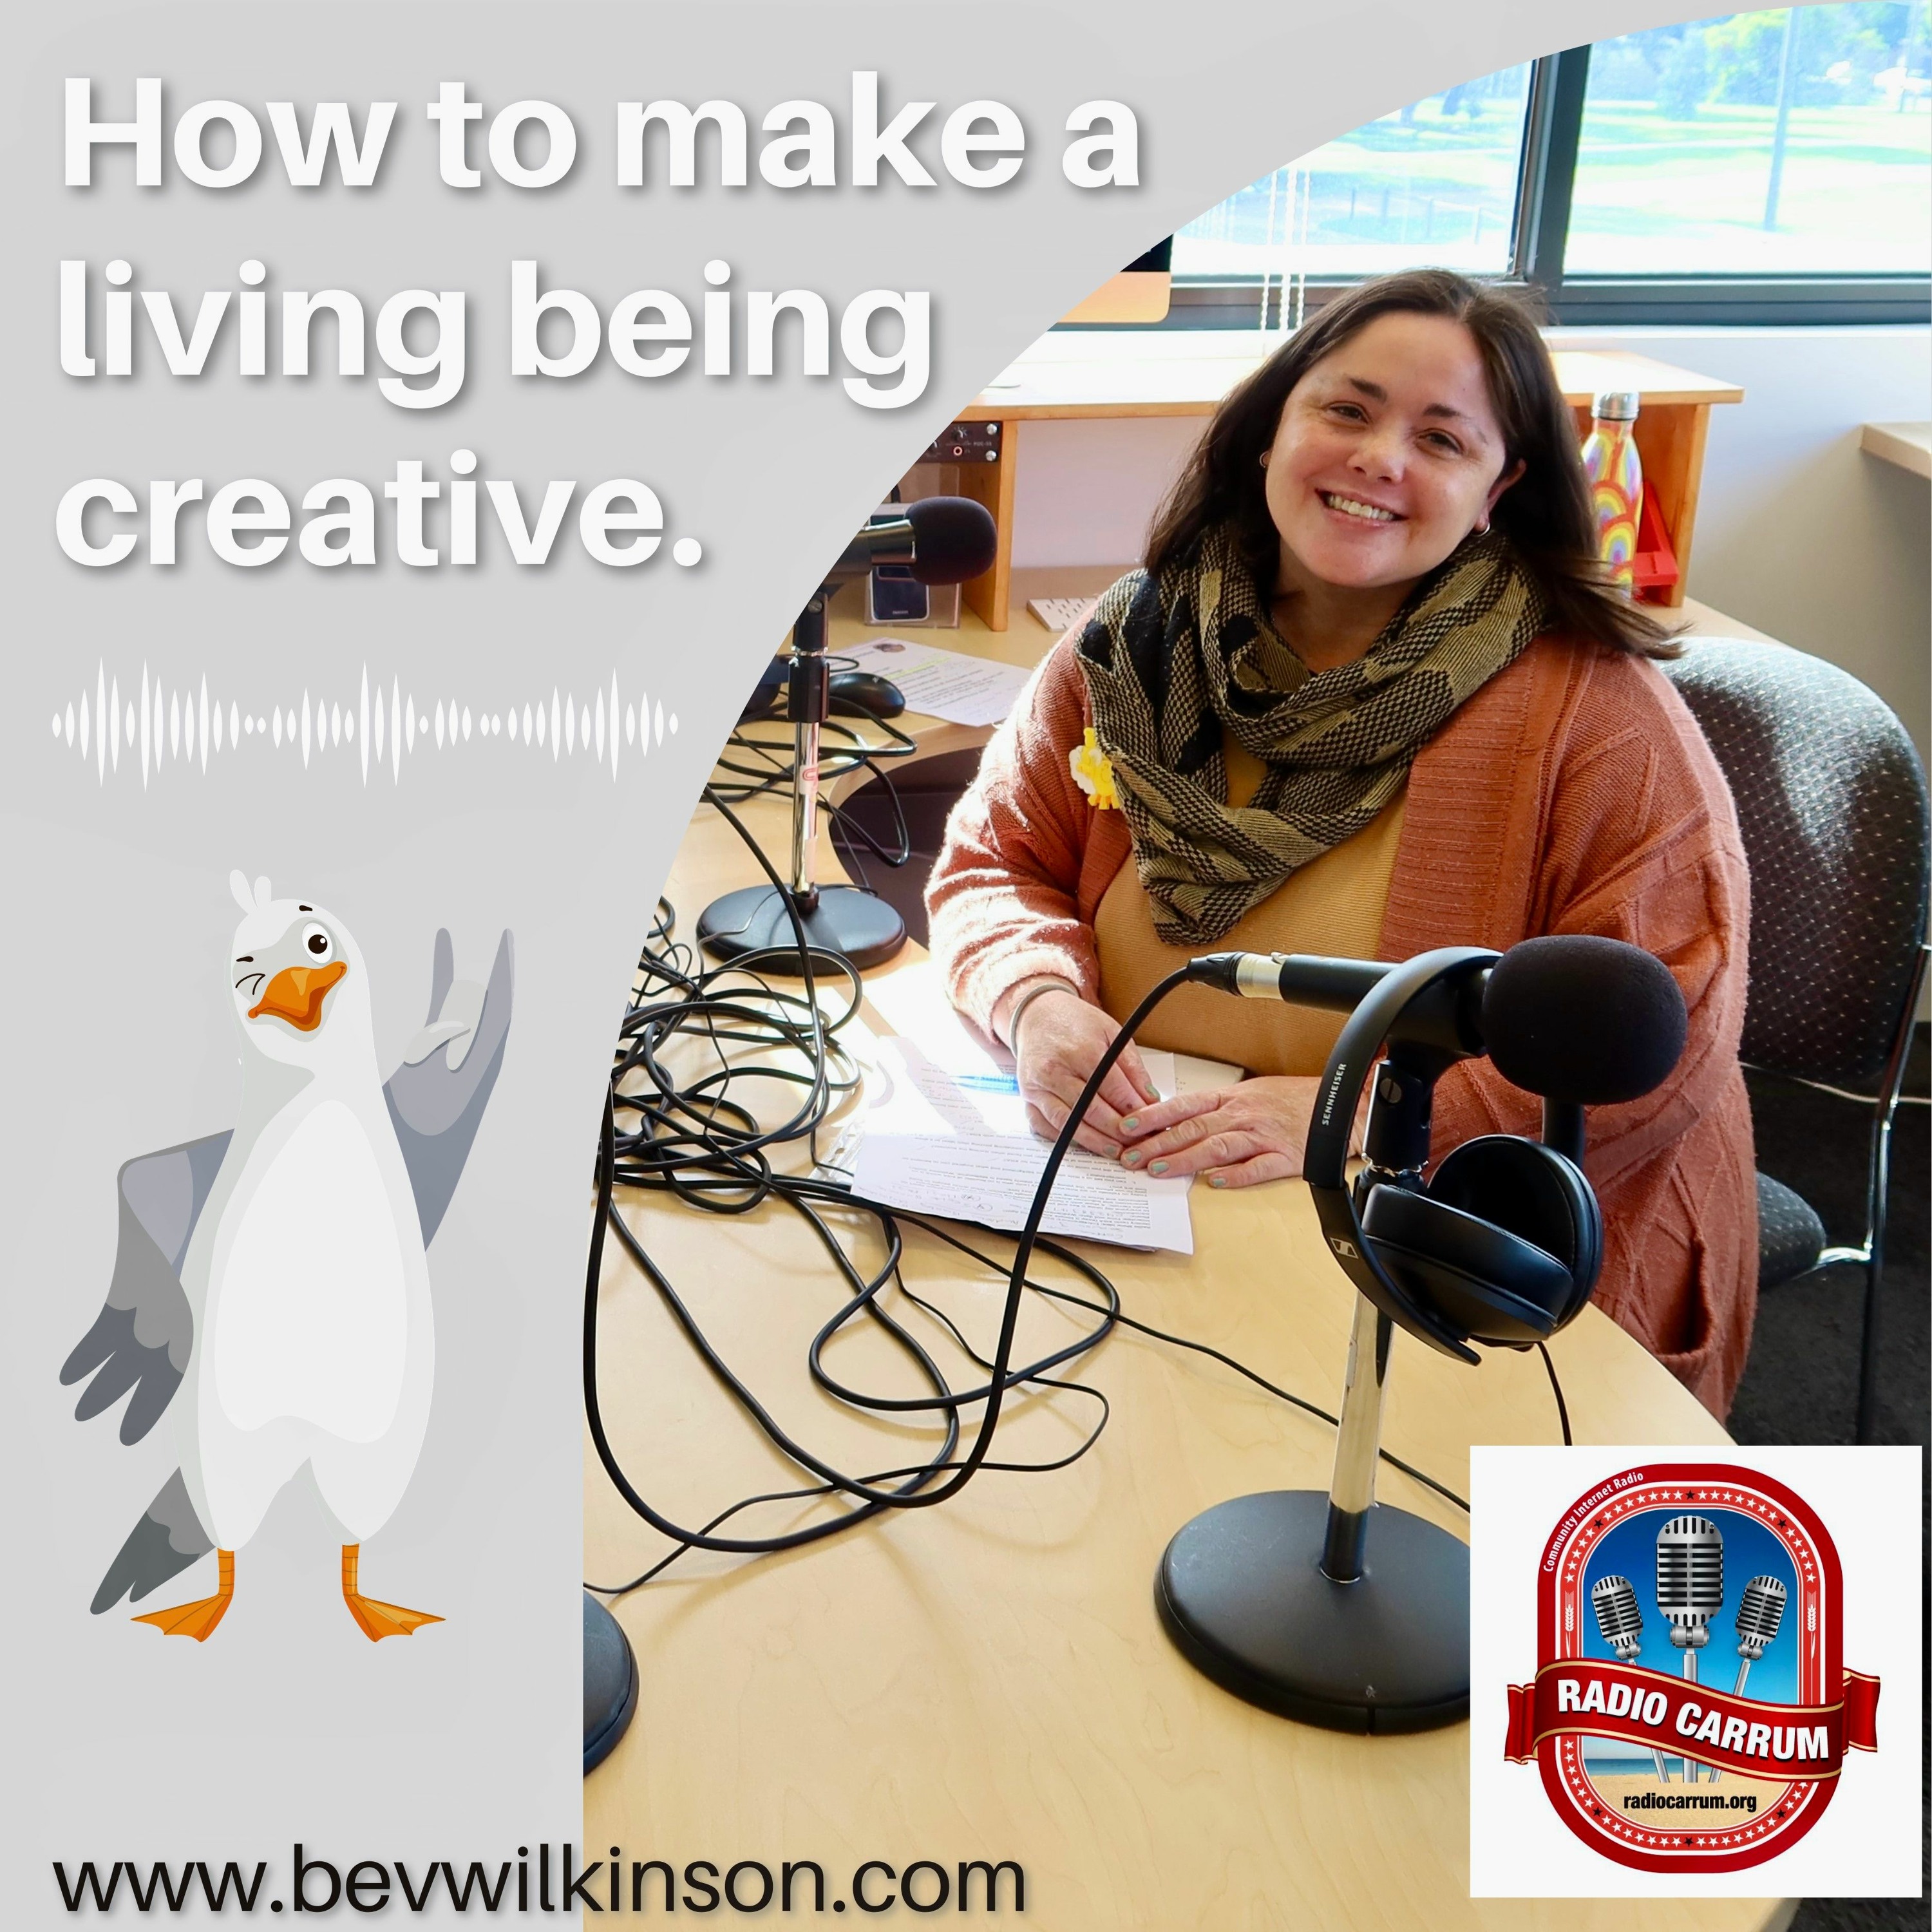 How To Make A Living Being Creative - Episode 4